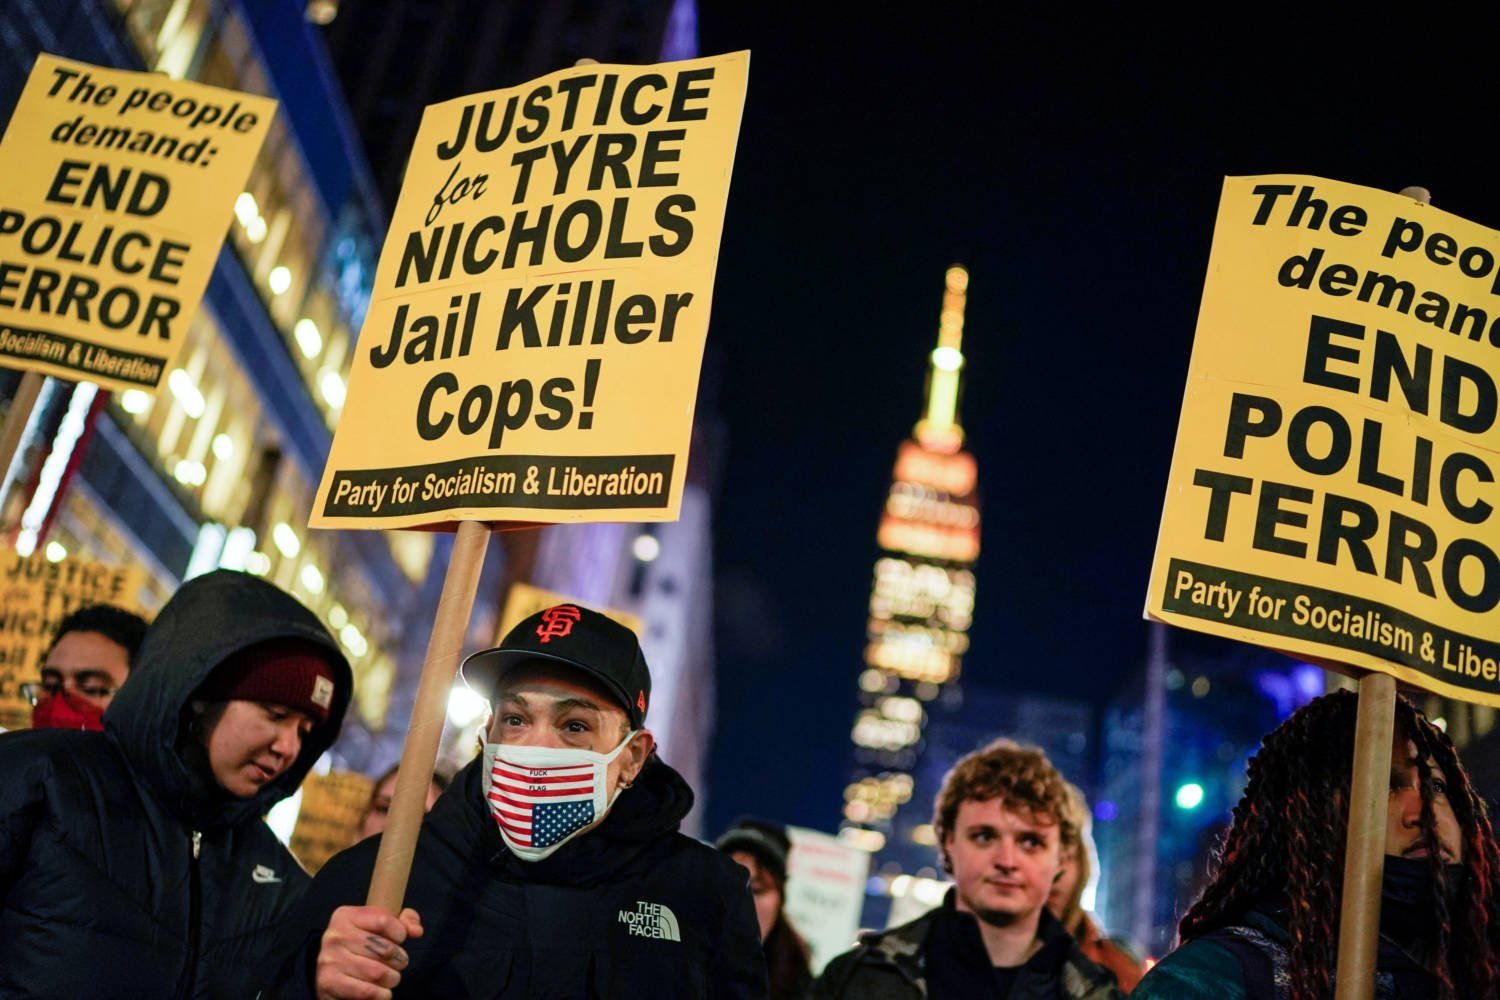 People React To Release Of Video Of Fatal Police Encounter With Tyre Nichols, In New York